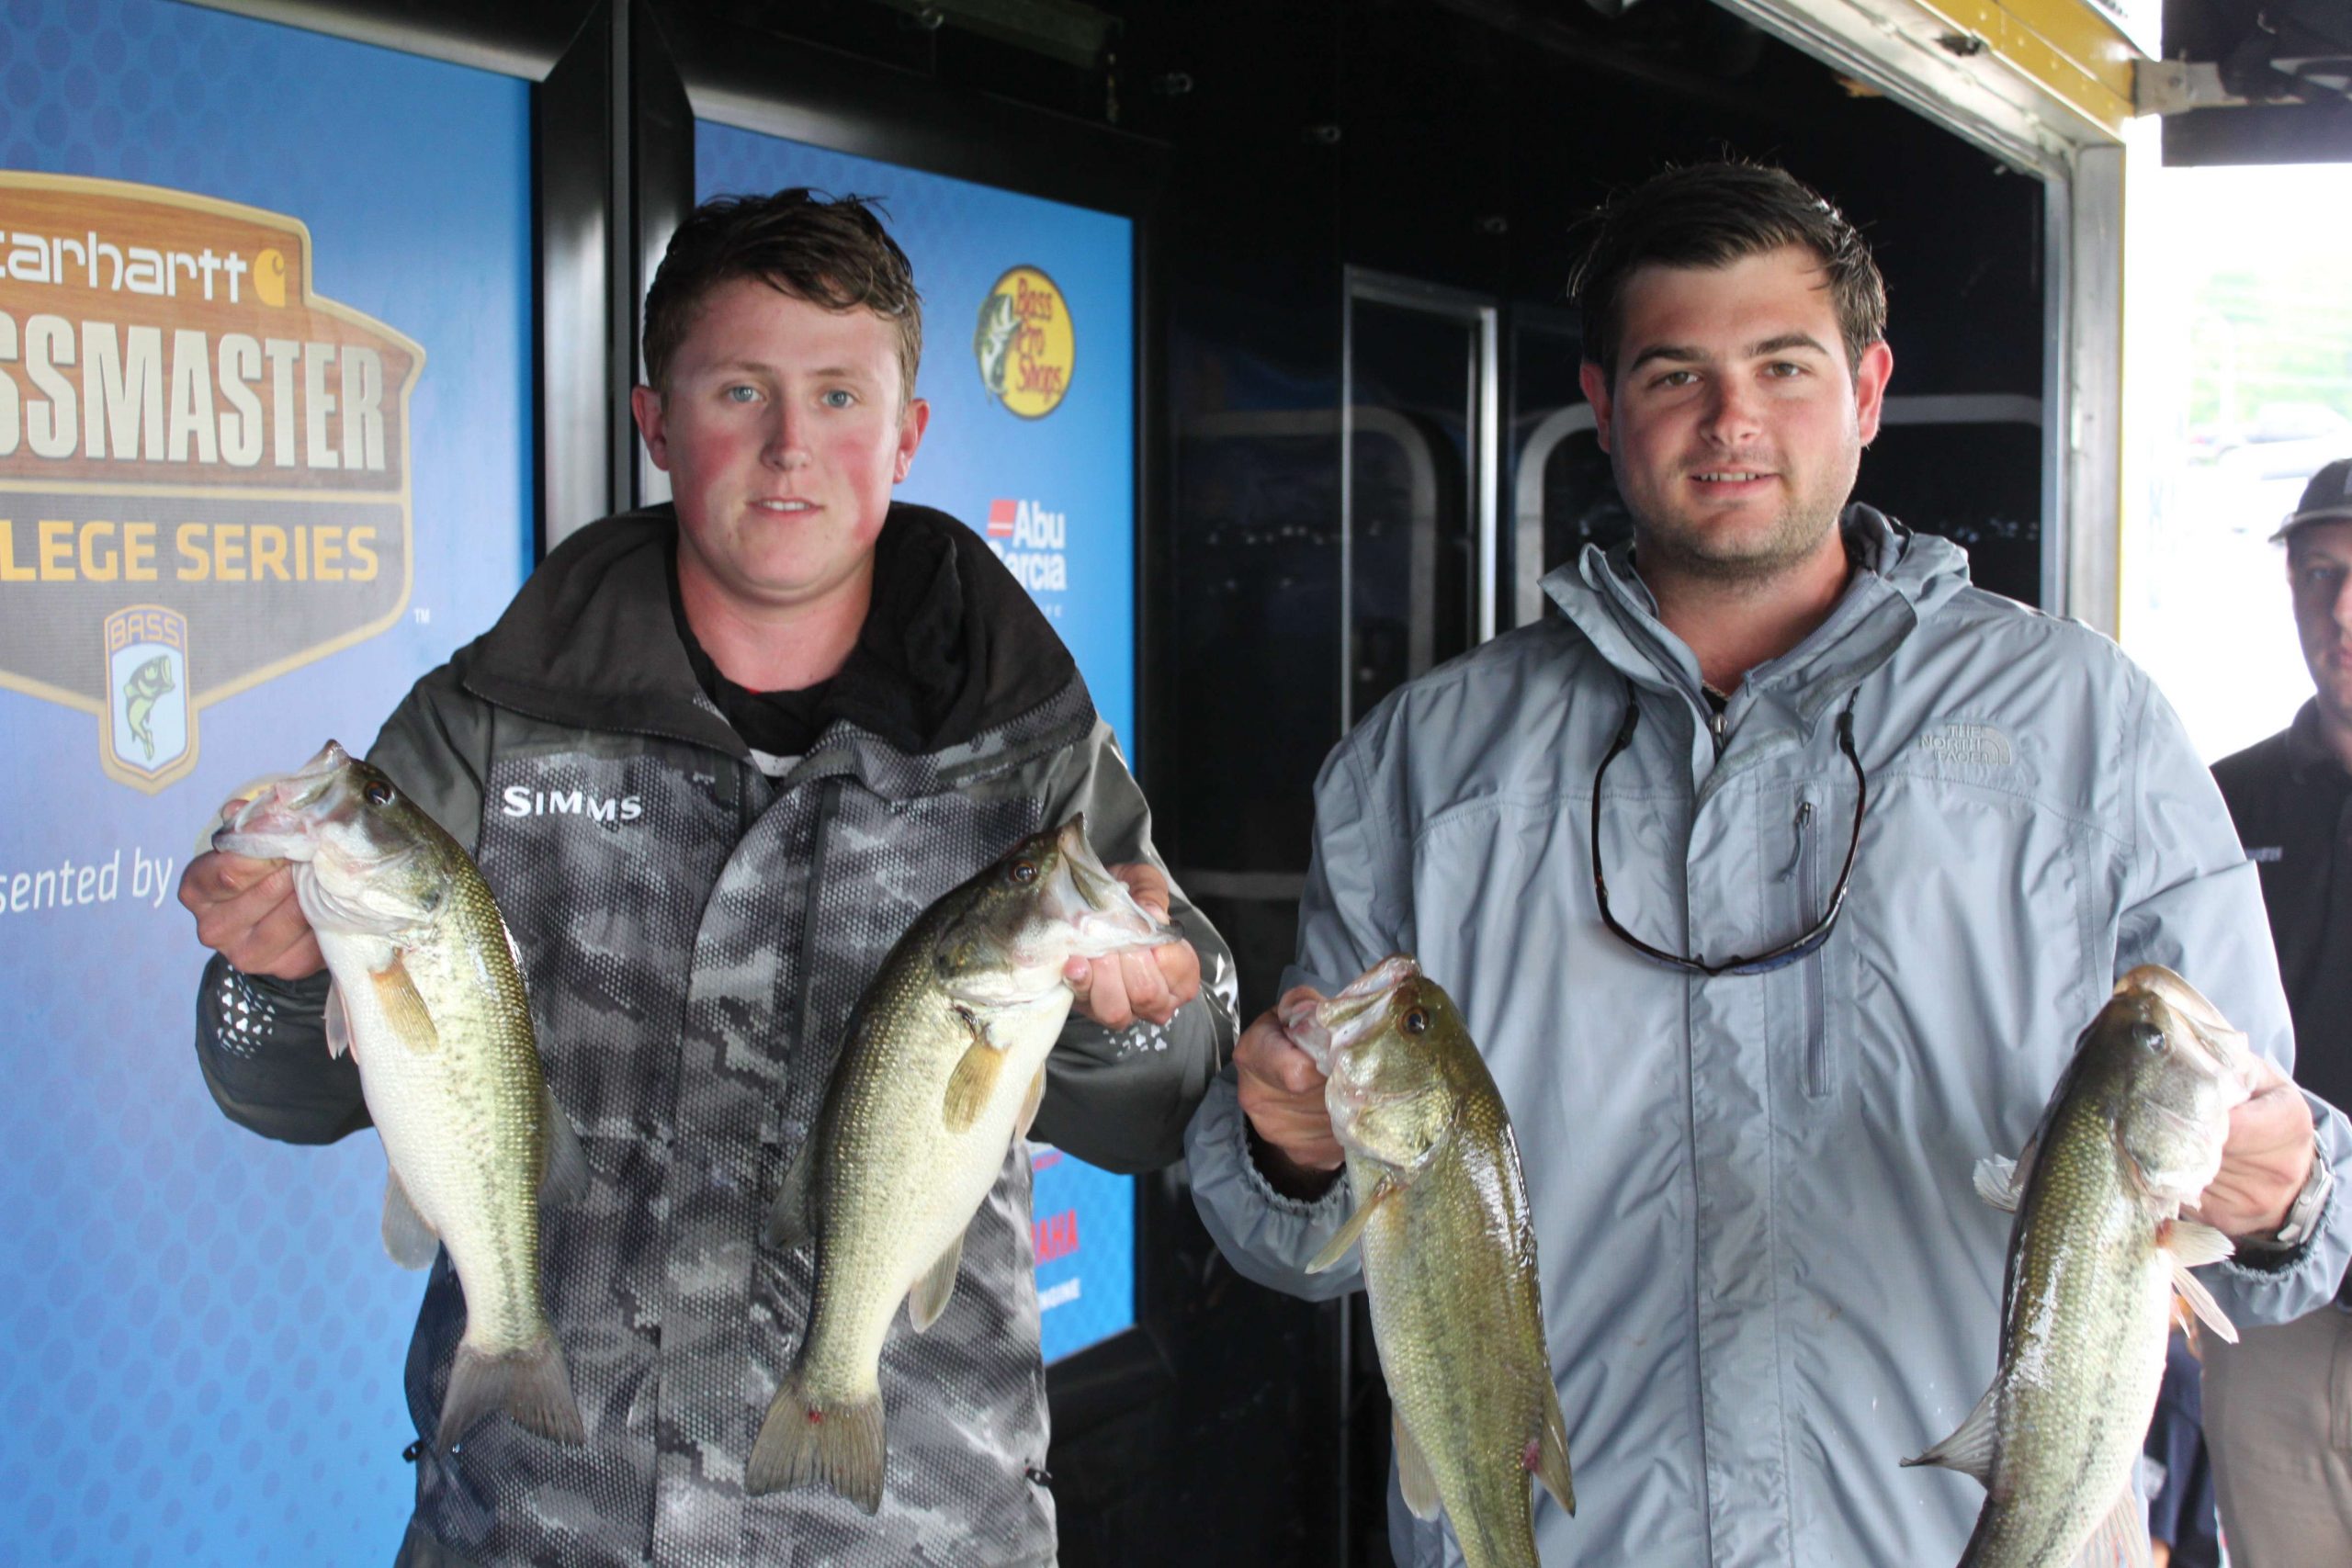 Thereâs Garret Sanders and Parker Hamil of Florida State who had a limit of 10-2. 